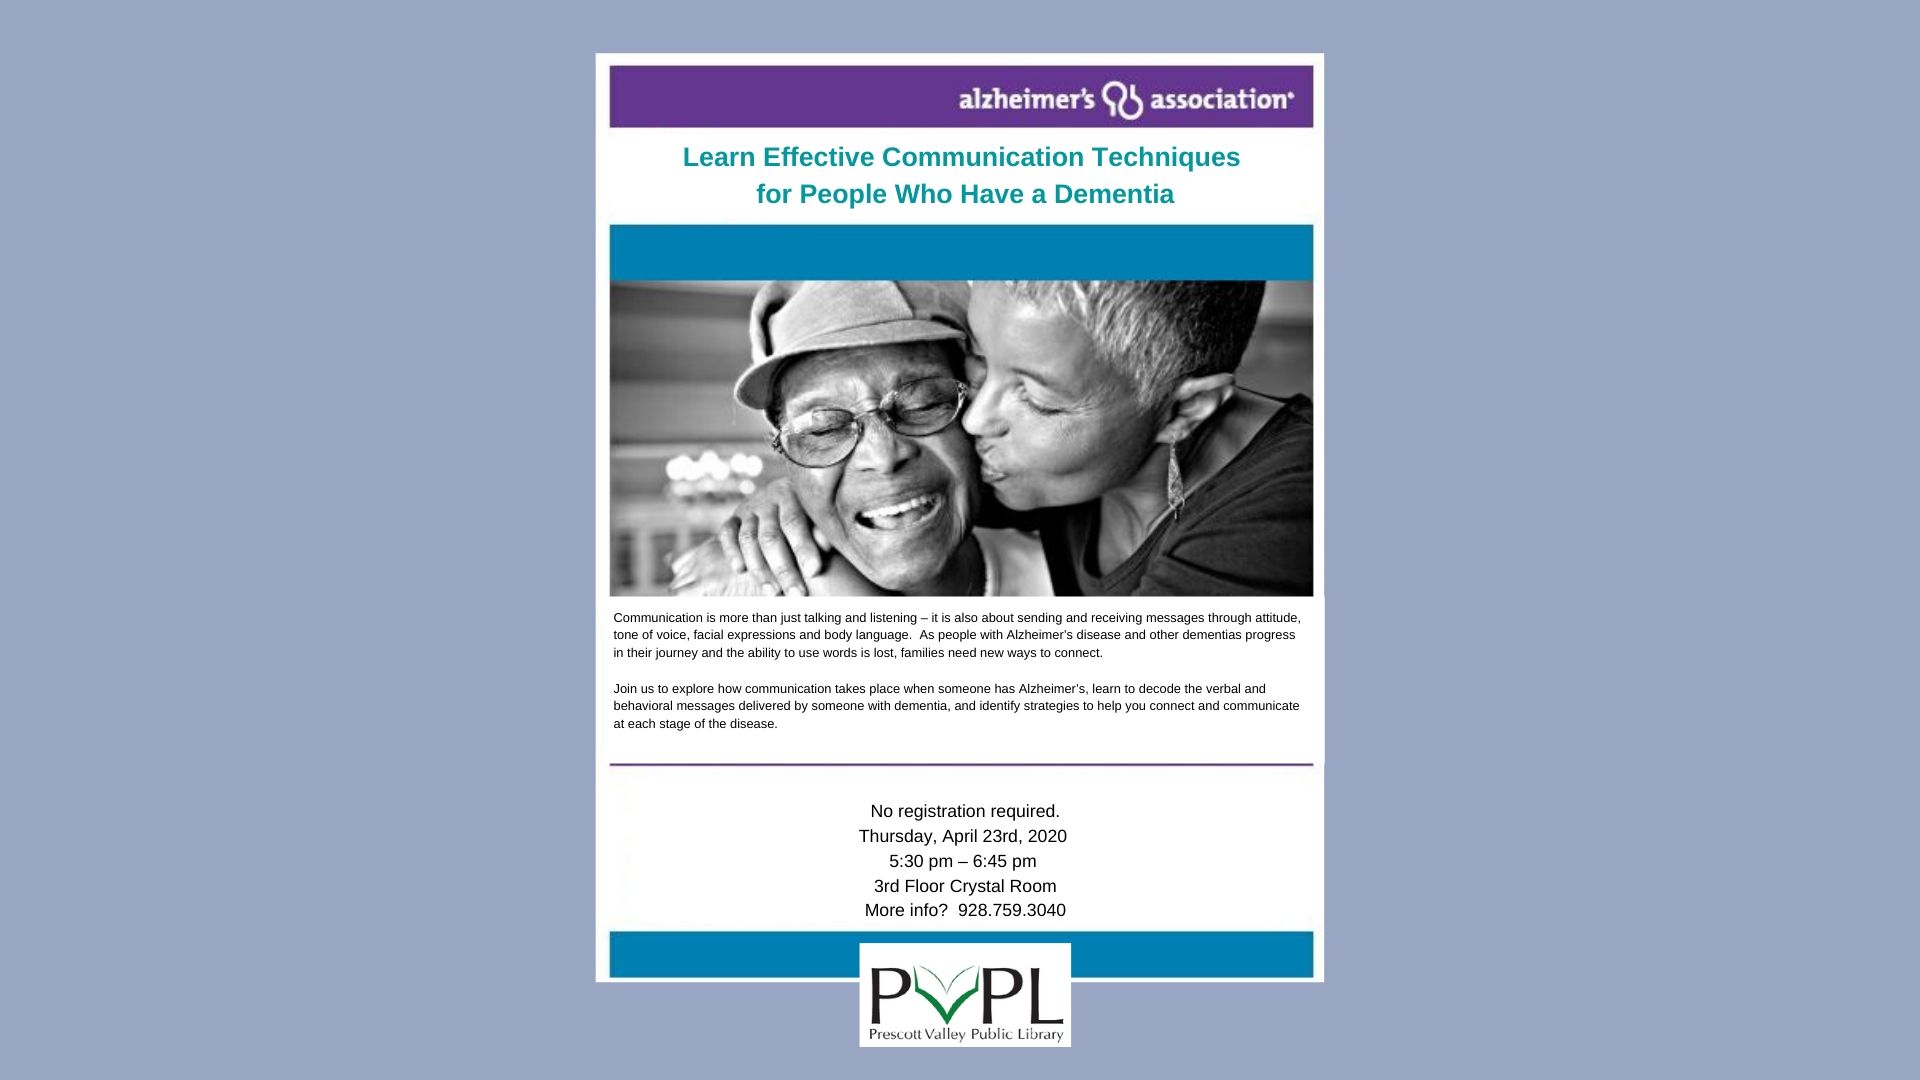 Alzheimer's Presentation @ Prescott Valley Public Library – Learn Effective Communication Techniques for People Who Have a Dementia